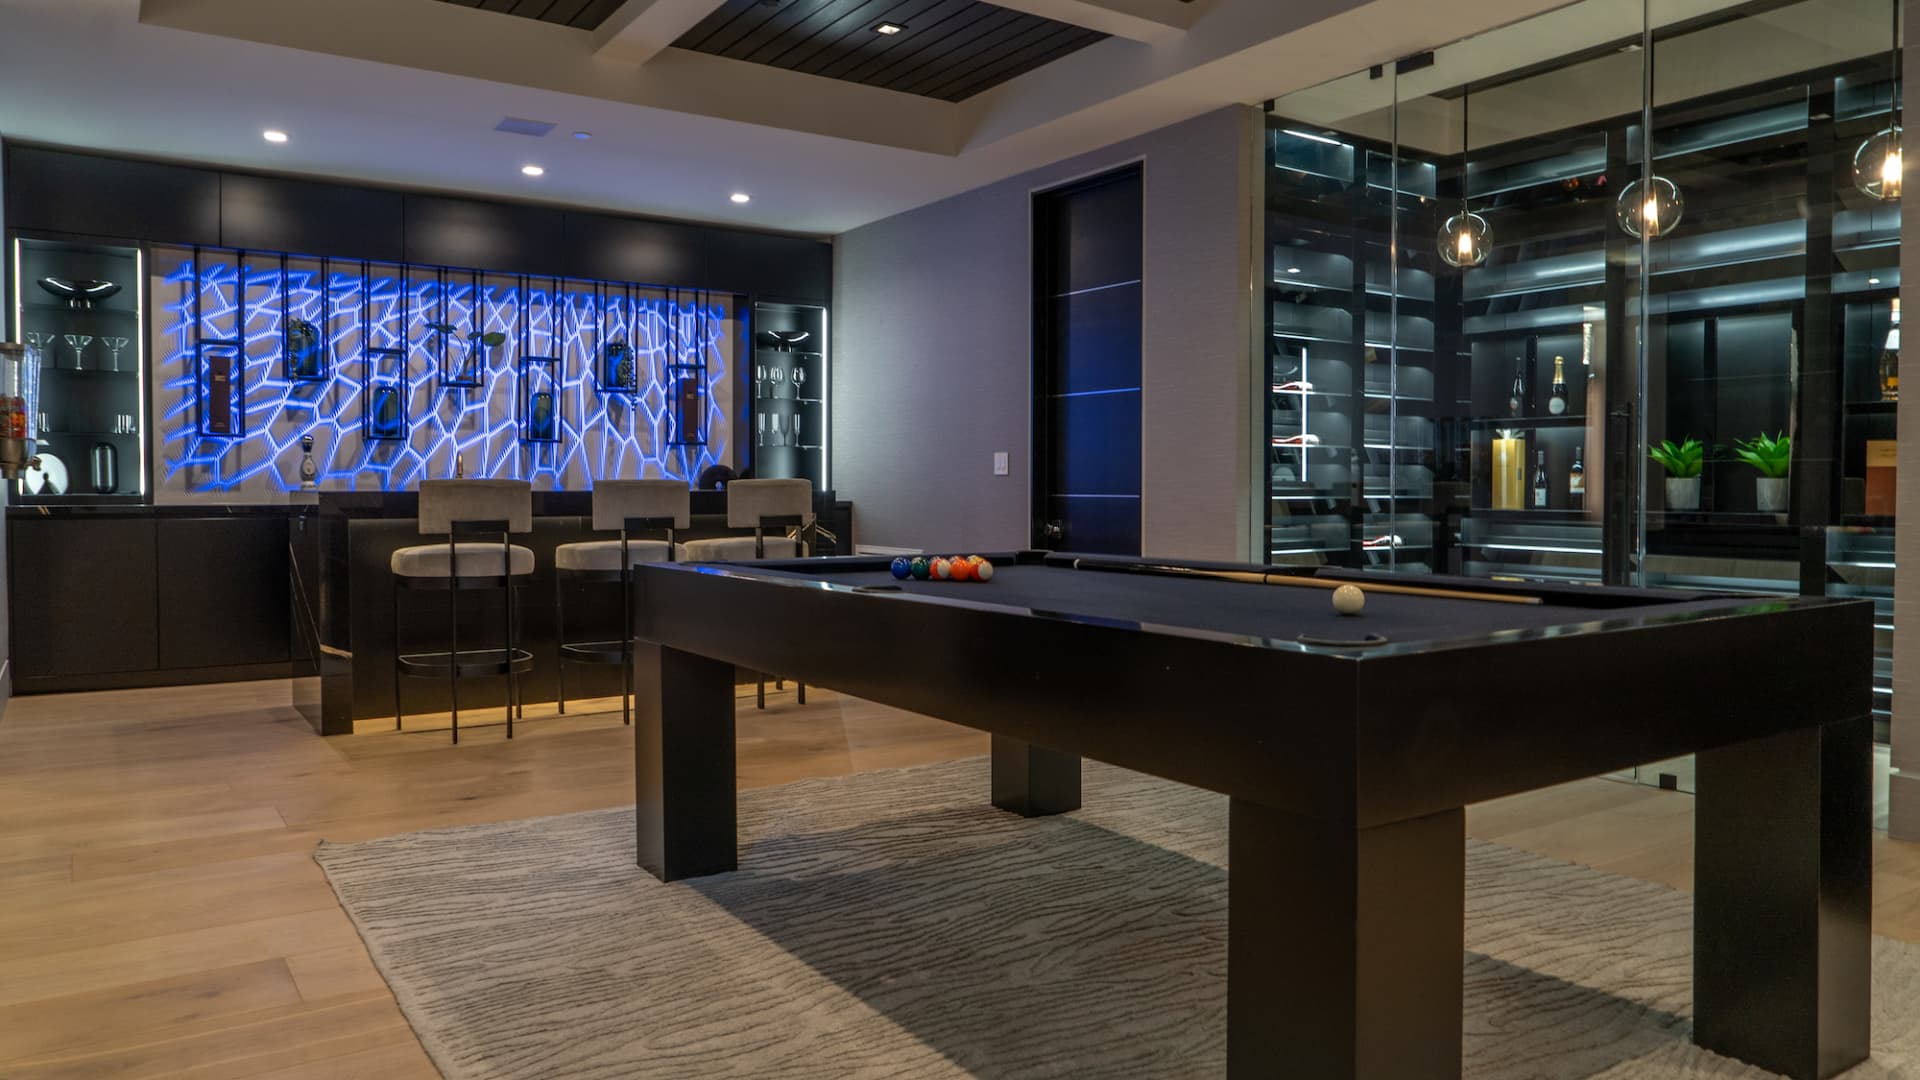 A bar, billiards table and 250-bottle wine cellar on the home's lowest level.